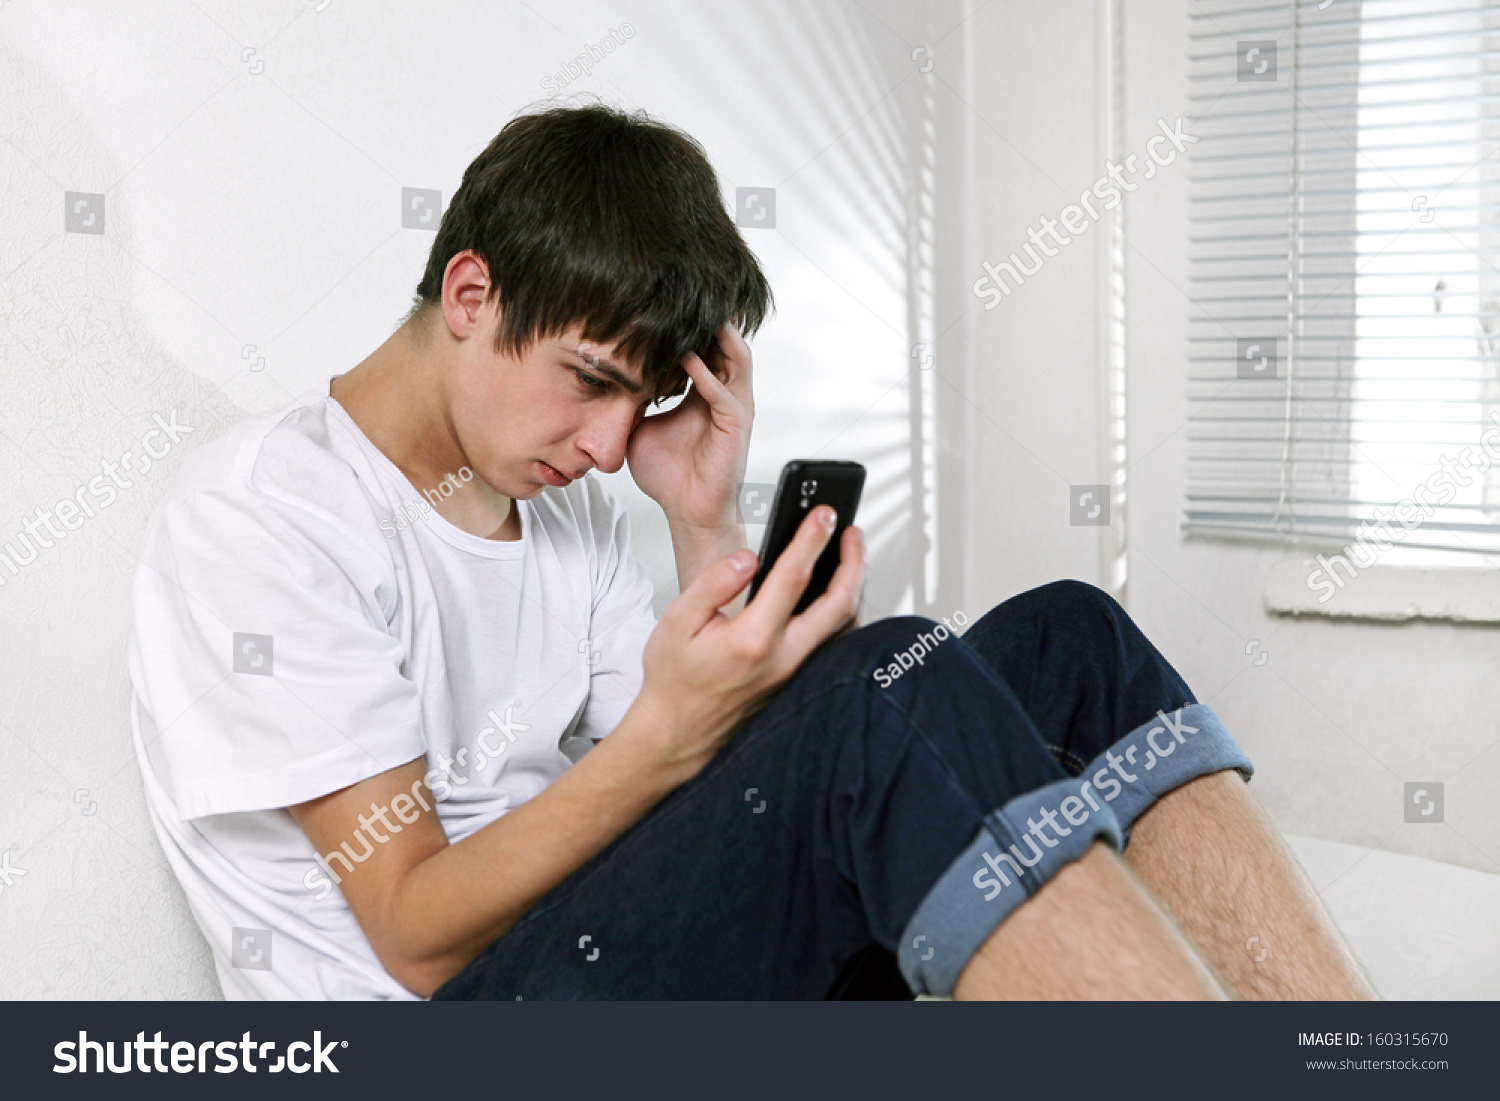 stock-photo-sad-young-man-with-cellphone